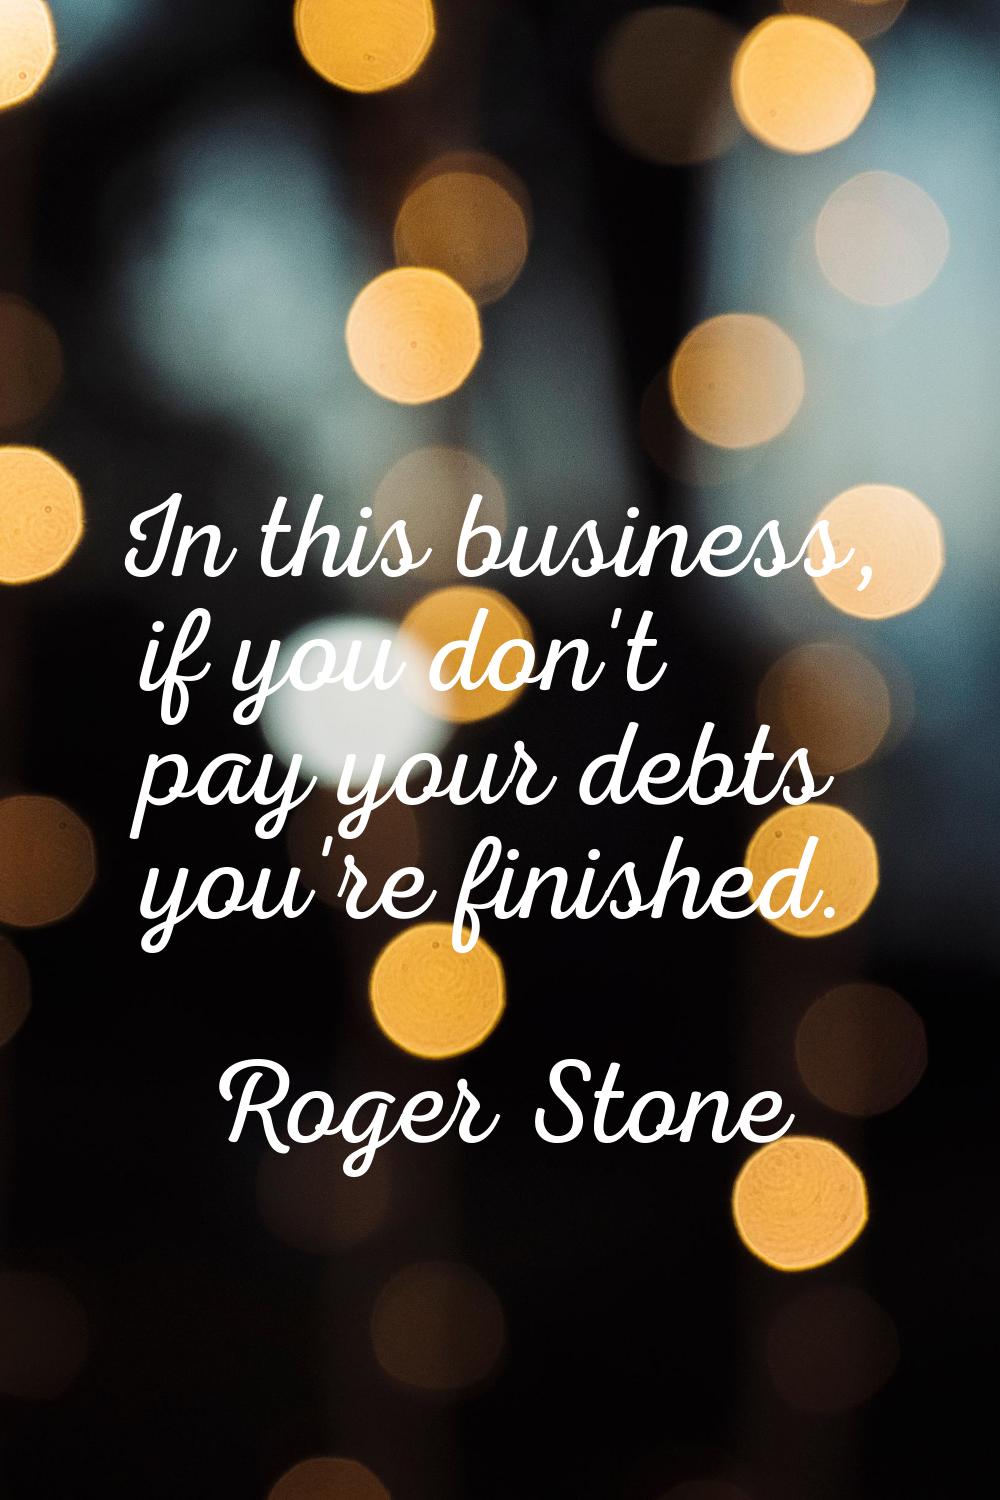 In this business, if you don't pay your debts you're finished.